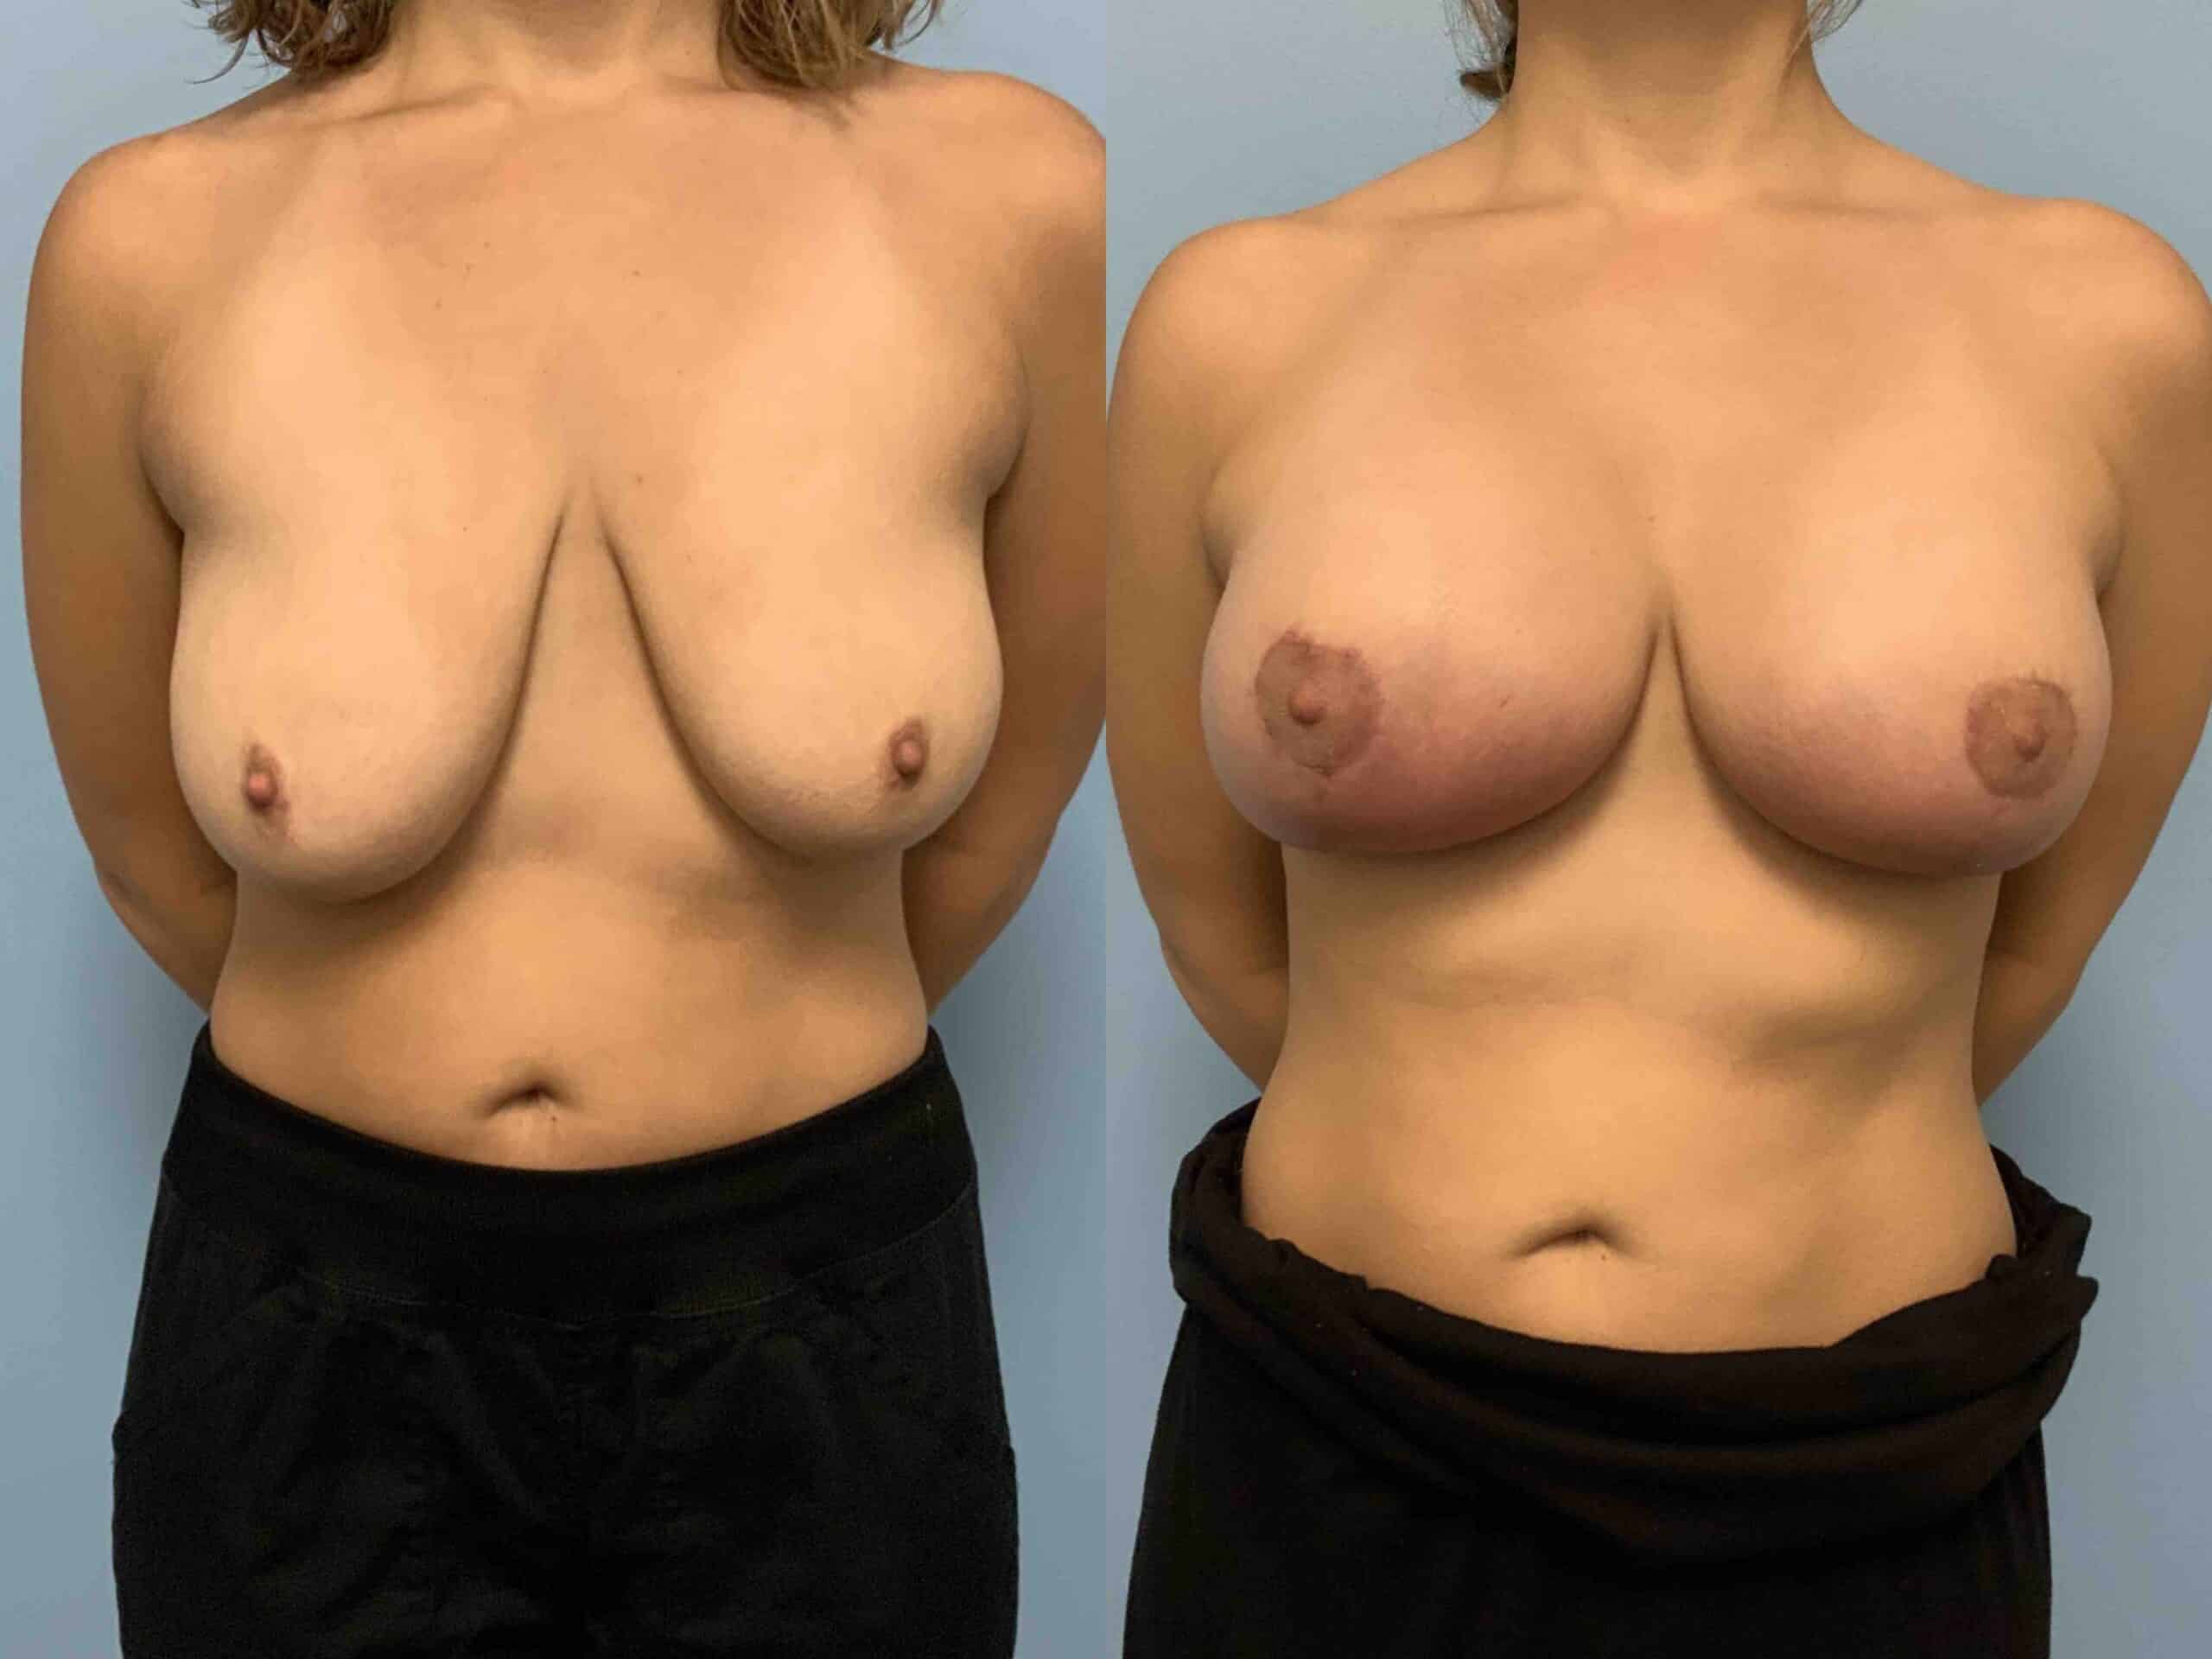 Before and after, 6 mo post op from Breast Augmentation with Breast Lift/Mastopexy & Galaflex Reinforcement performed by Dr. Paul Vanek (front view)